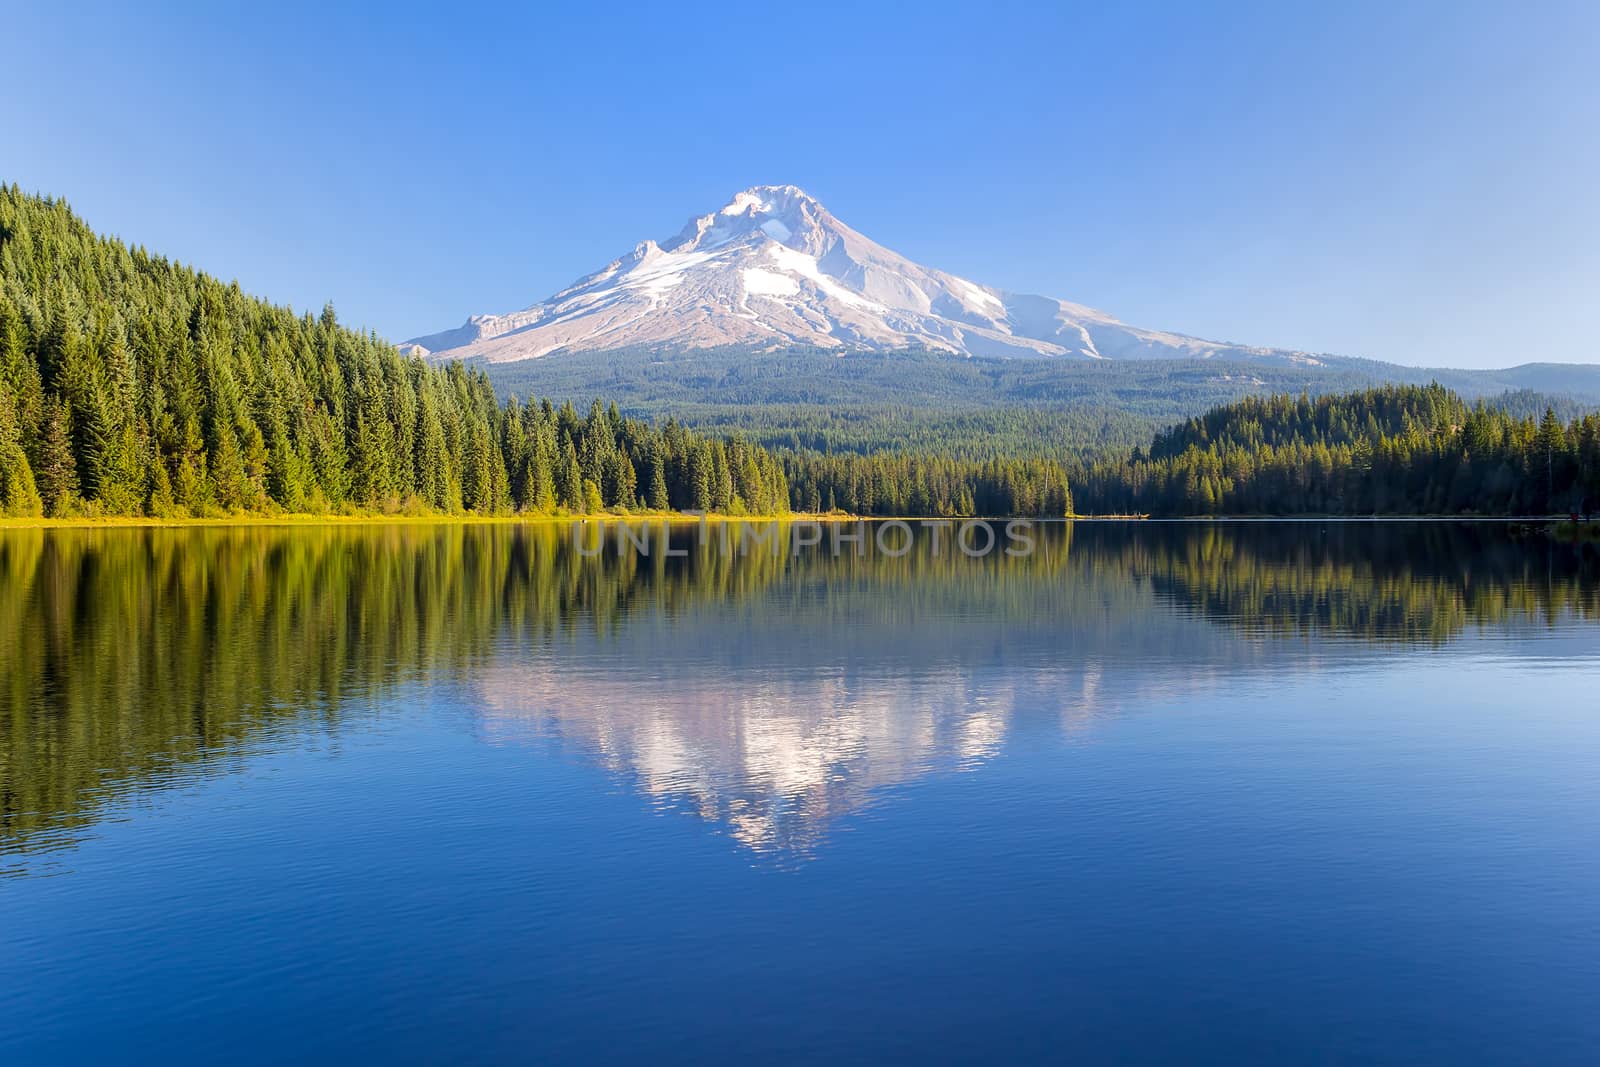 Mount Hood on a Sunny Day by Davidgn